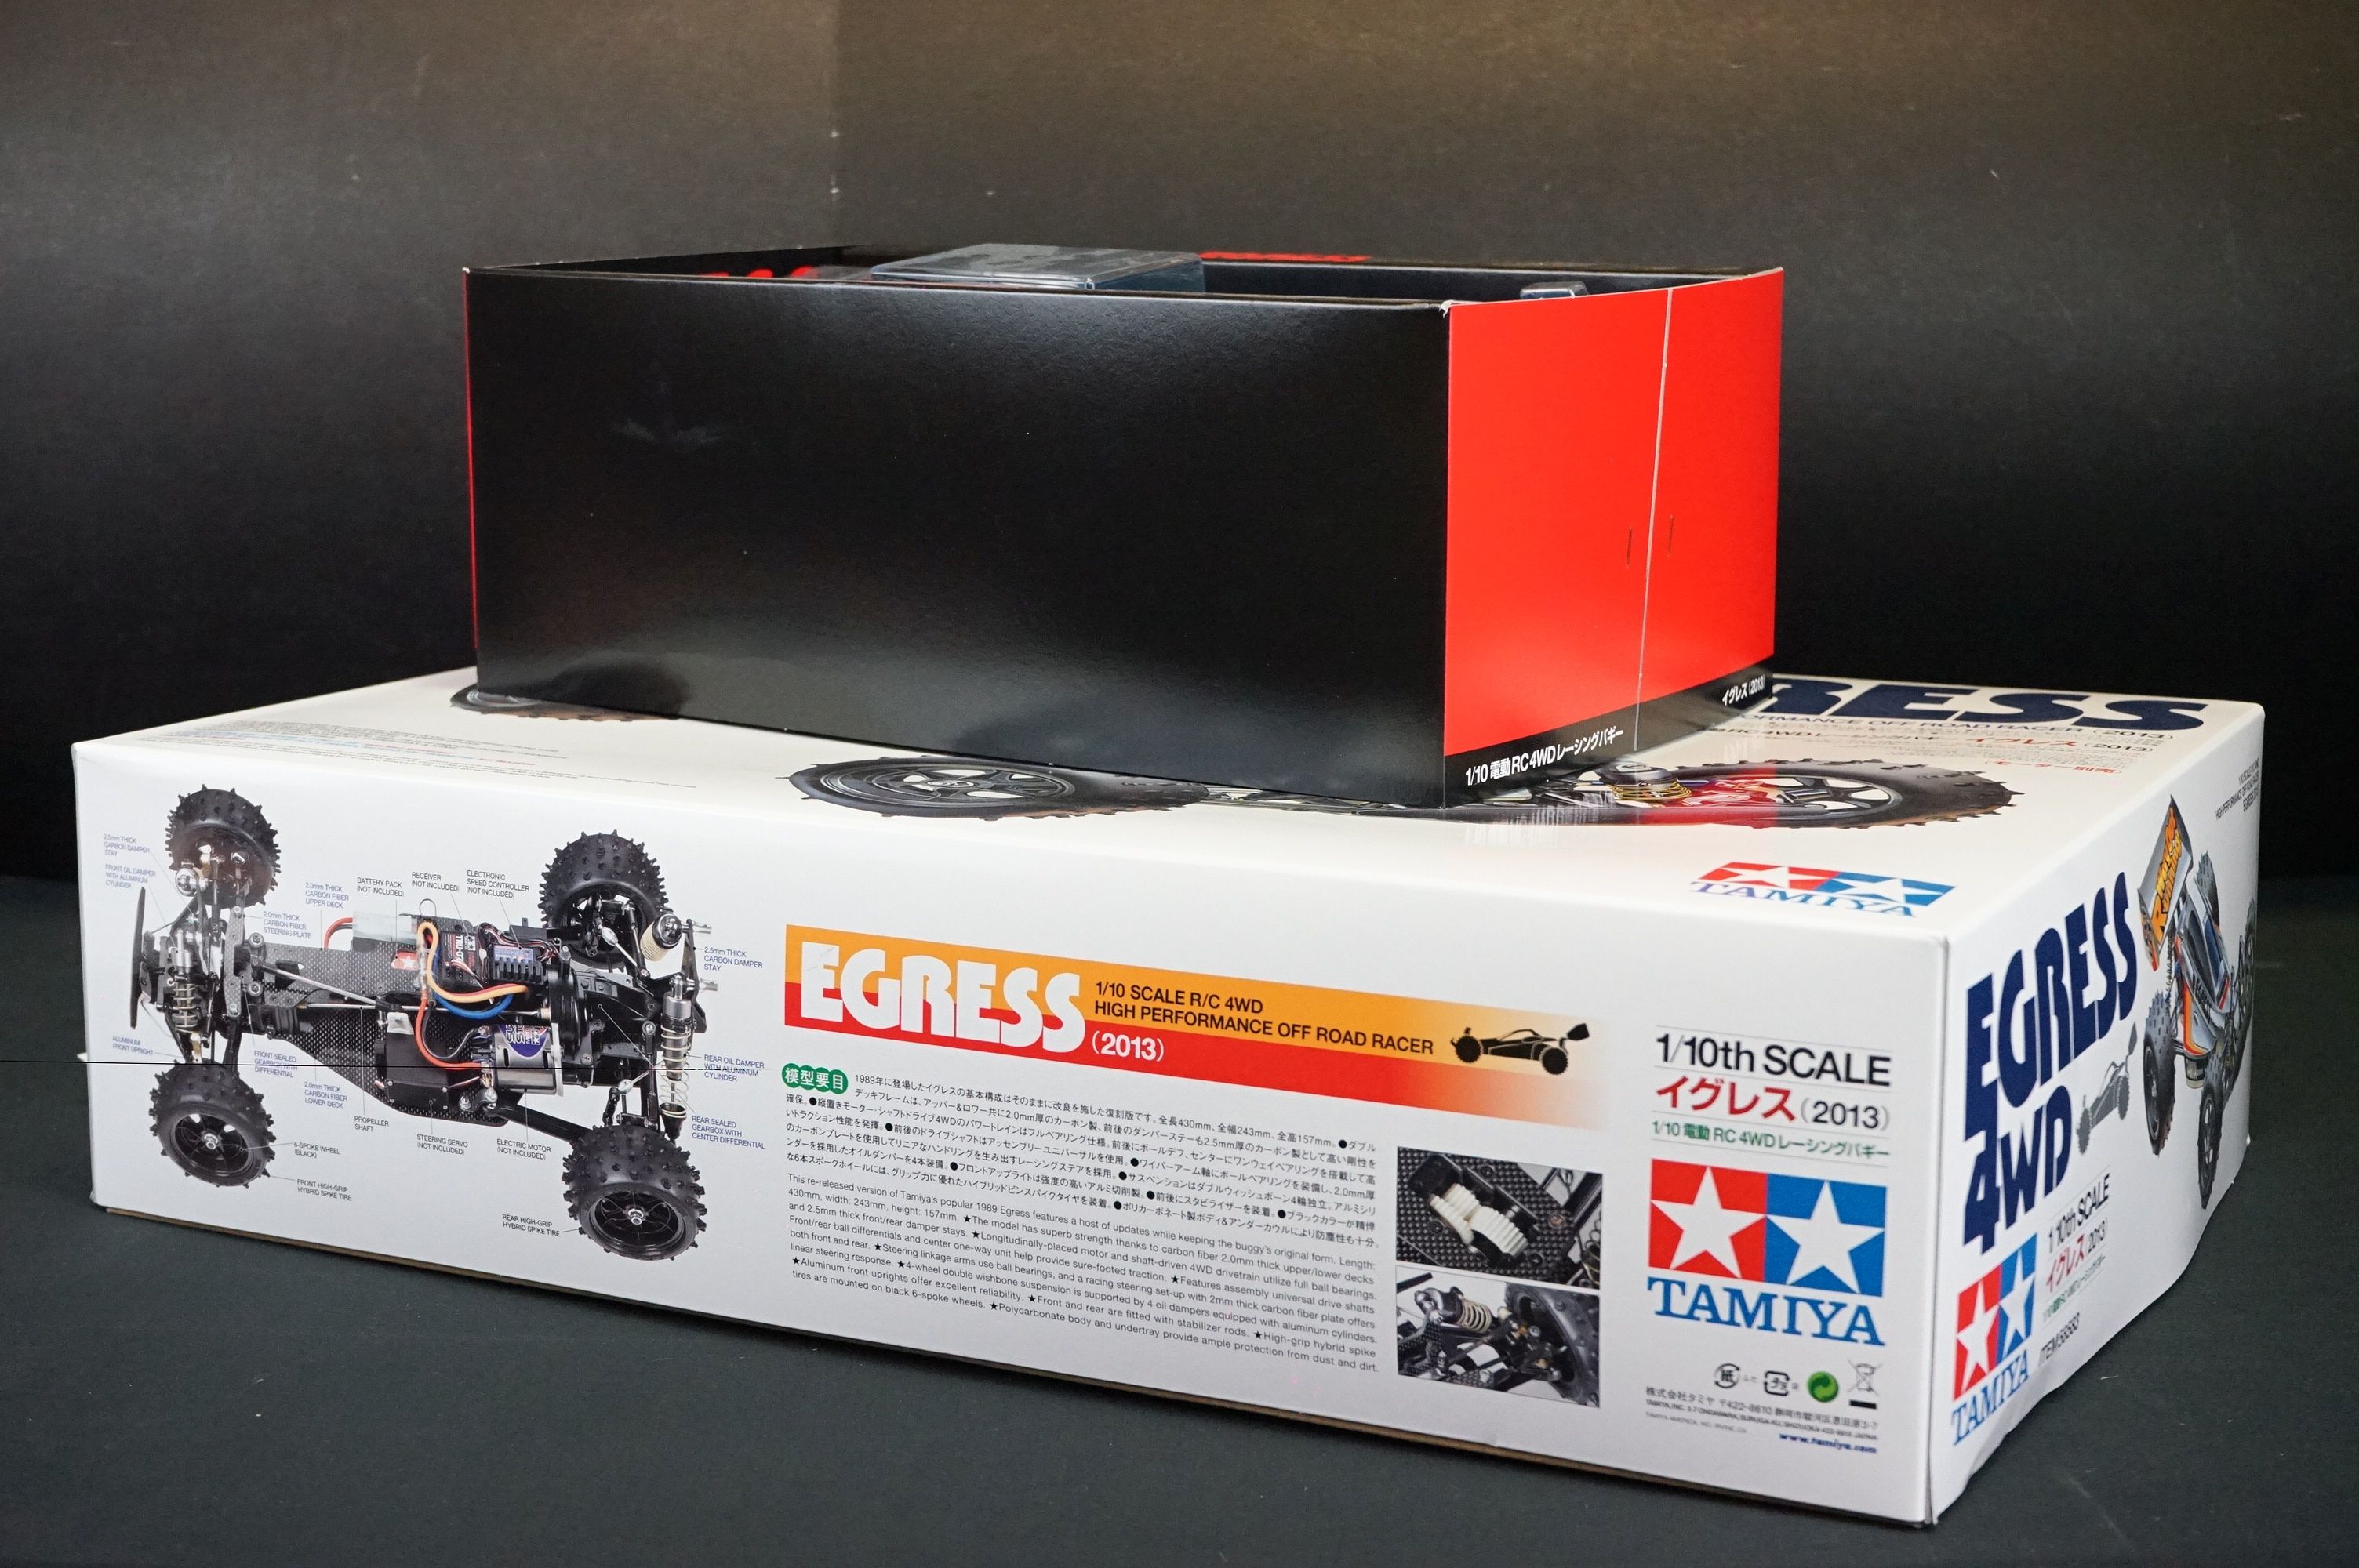 Boxed Tamiya 1/10 58583 Egress 4WD R/C High Speed Performance Off Road Racer radio control car, with - Image 12 of 12